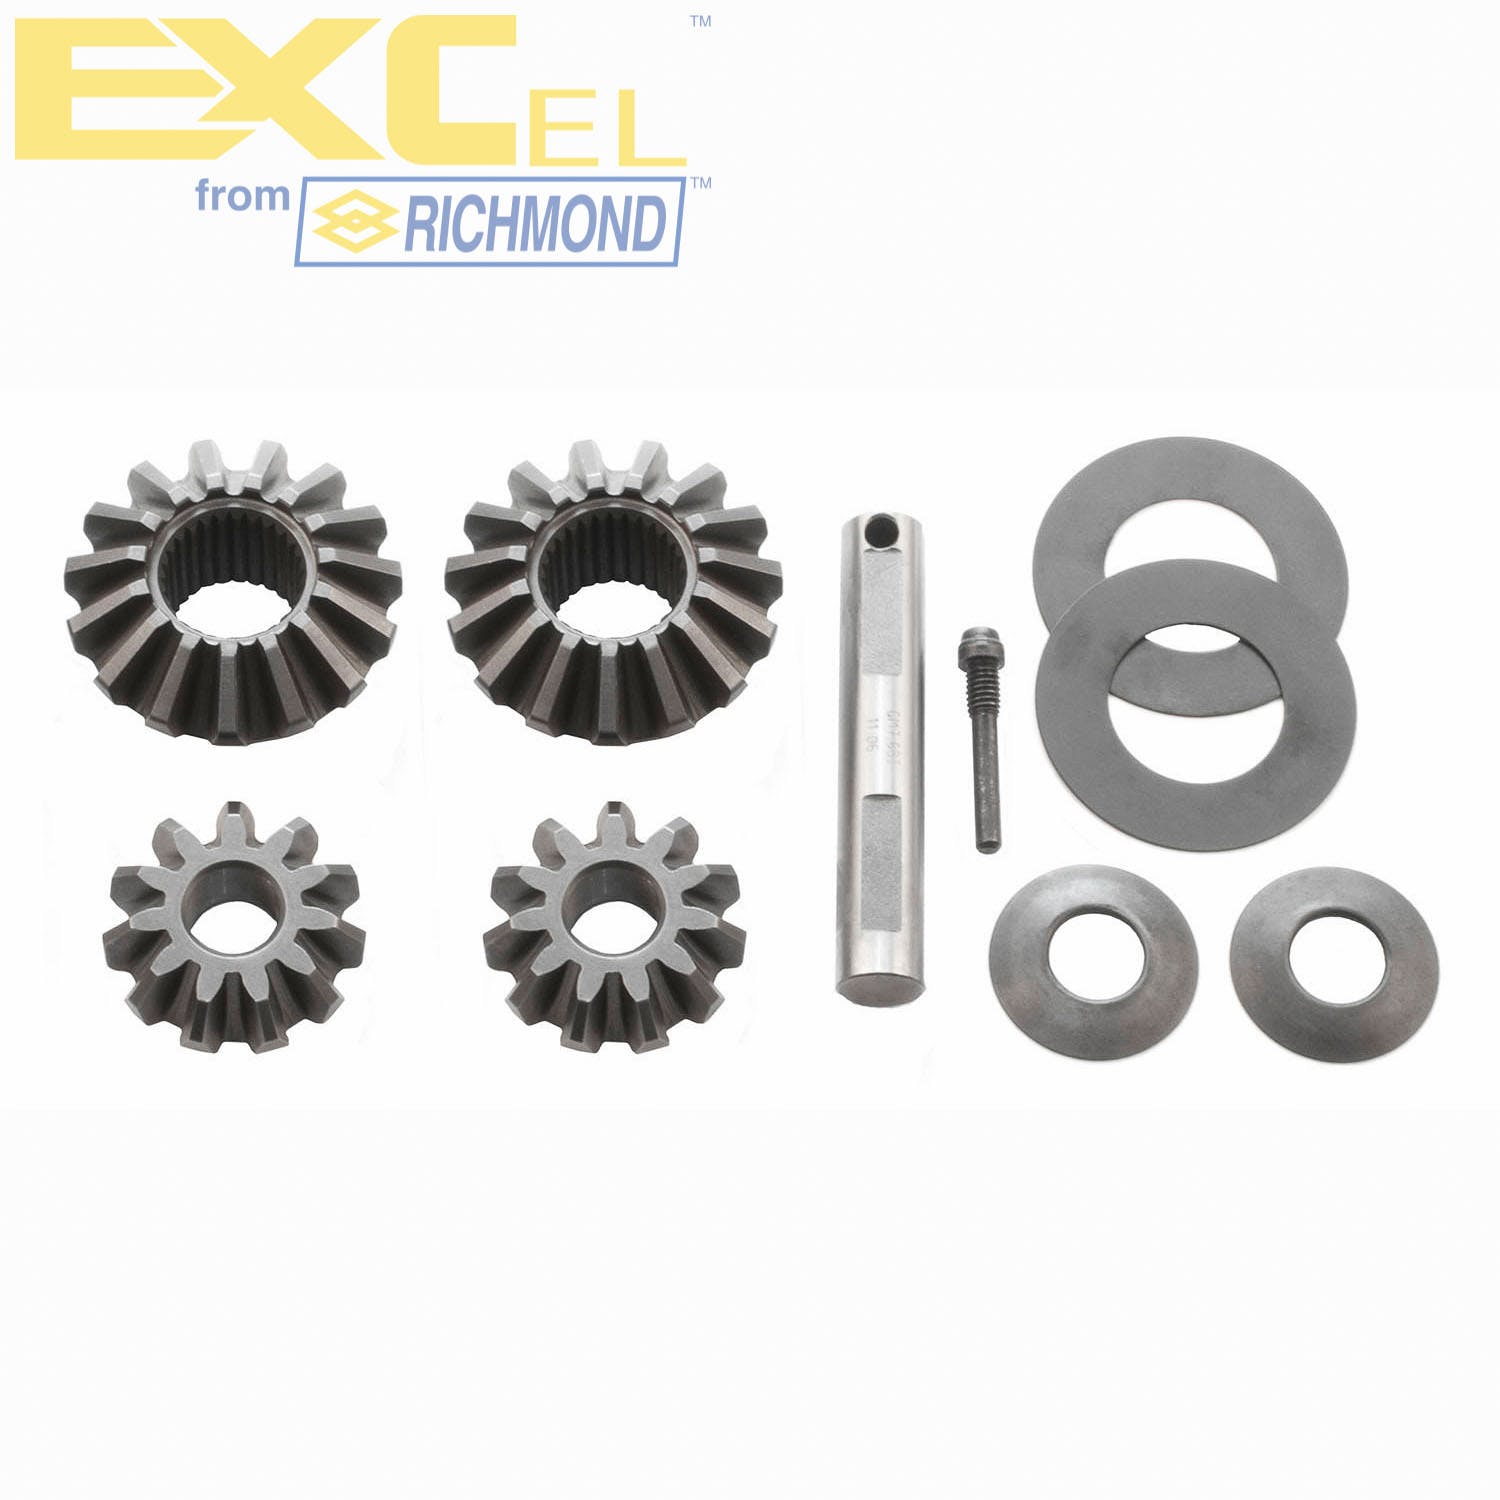 Excel XL-4042 Differential Carrier Gear Kit